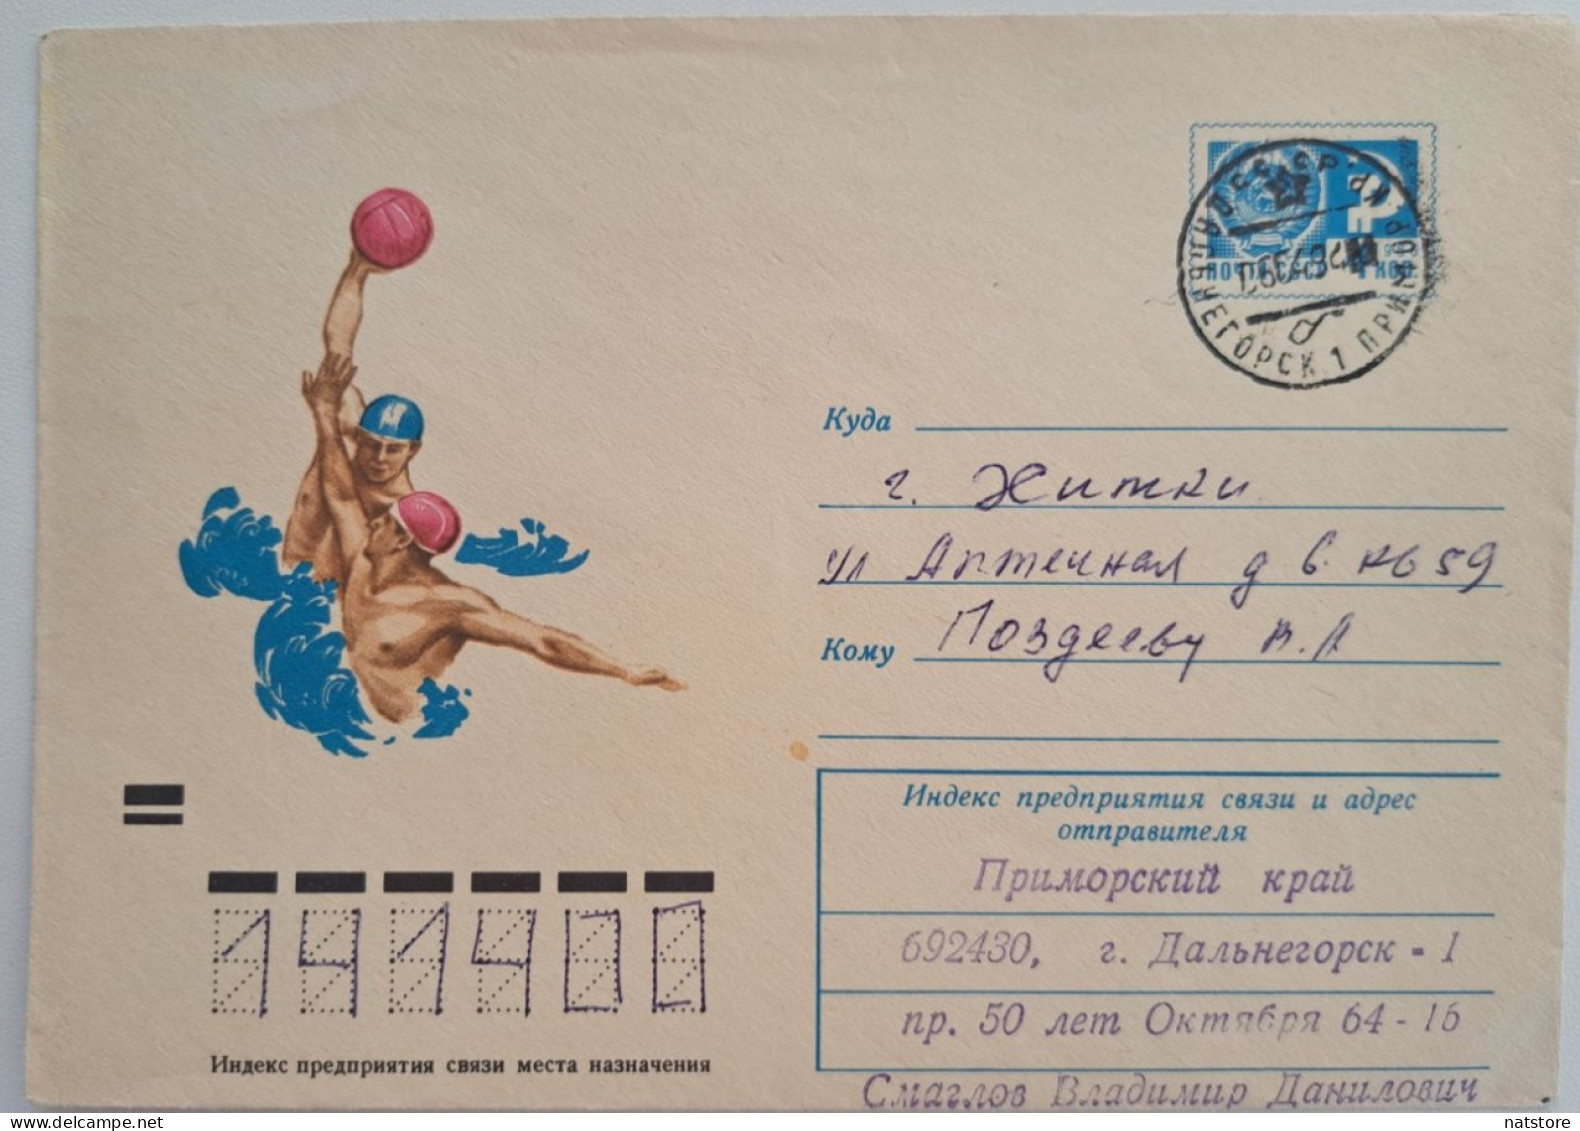 1972..USSR..COVER WITH STAMP..PAST MAIL..WATER POLO - Water-Polo